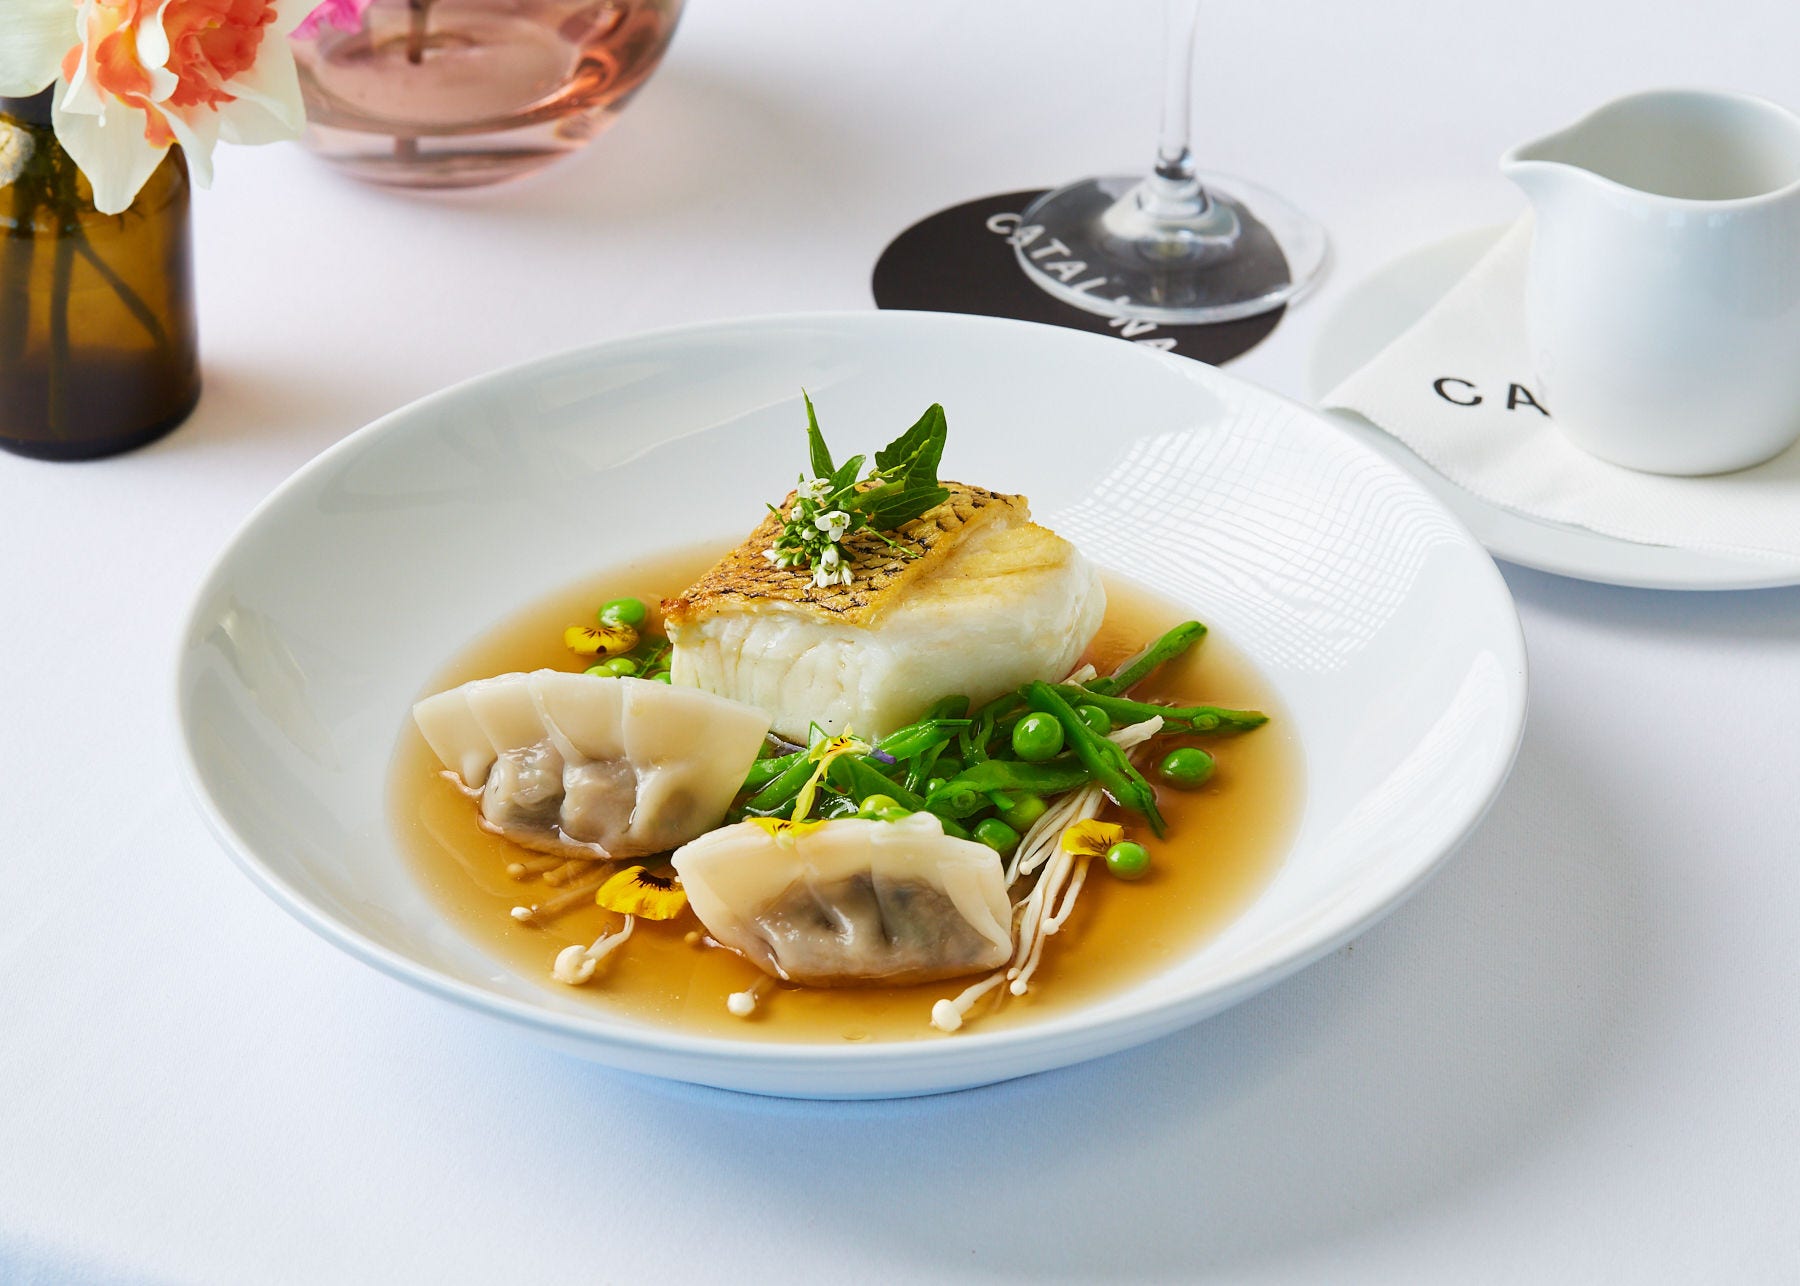 A plate with a fillet of toothfish, two dumplings, shelled and unshelled peas, enoki mushrooms and edible flowers, in a light broth.